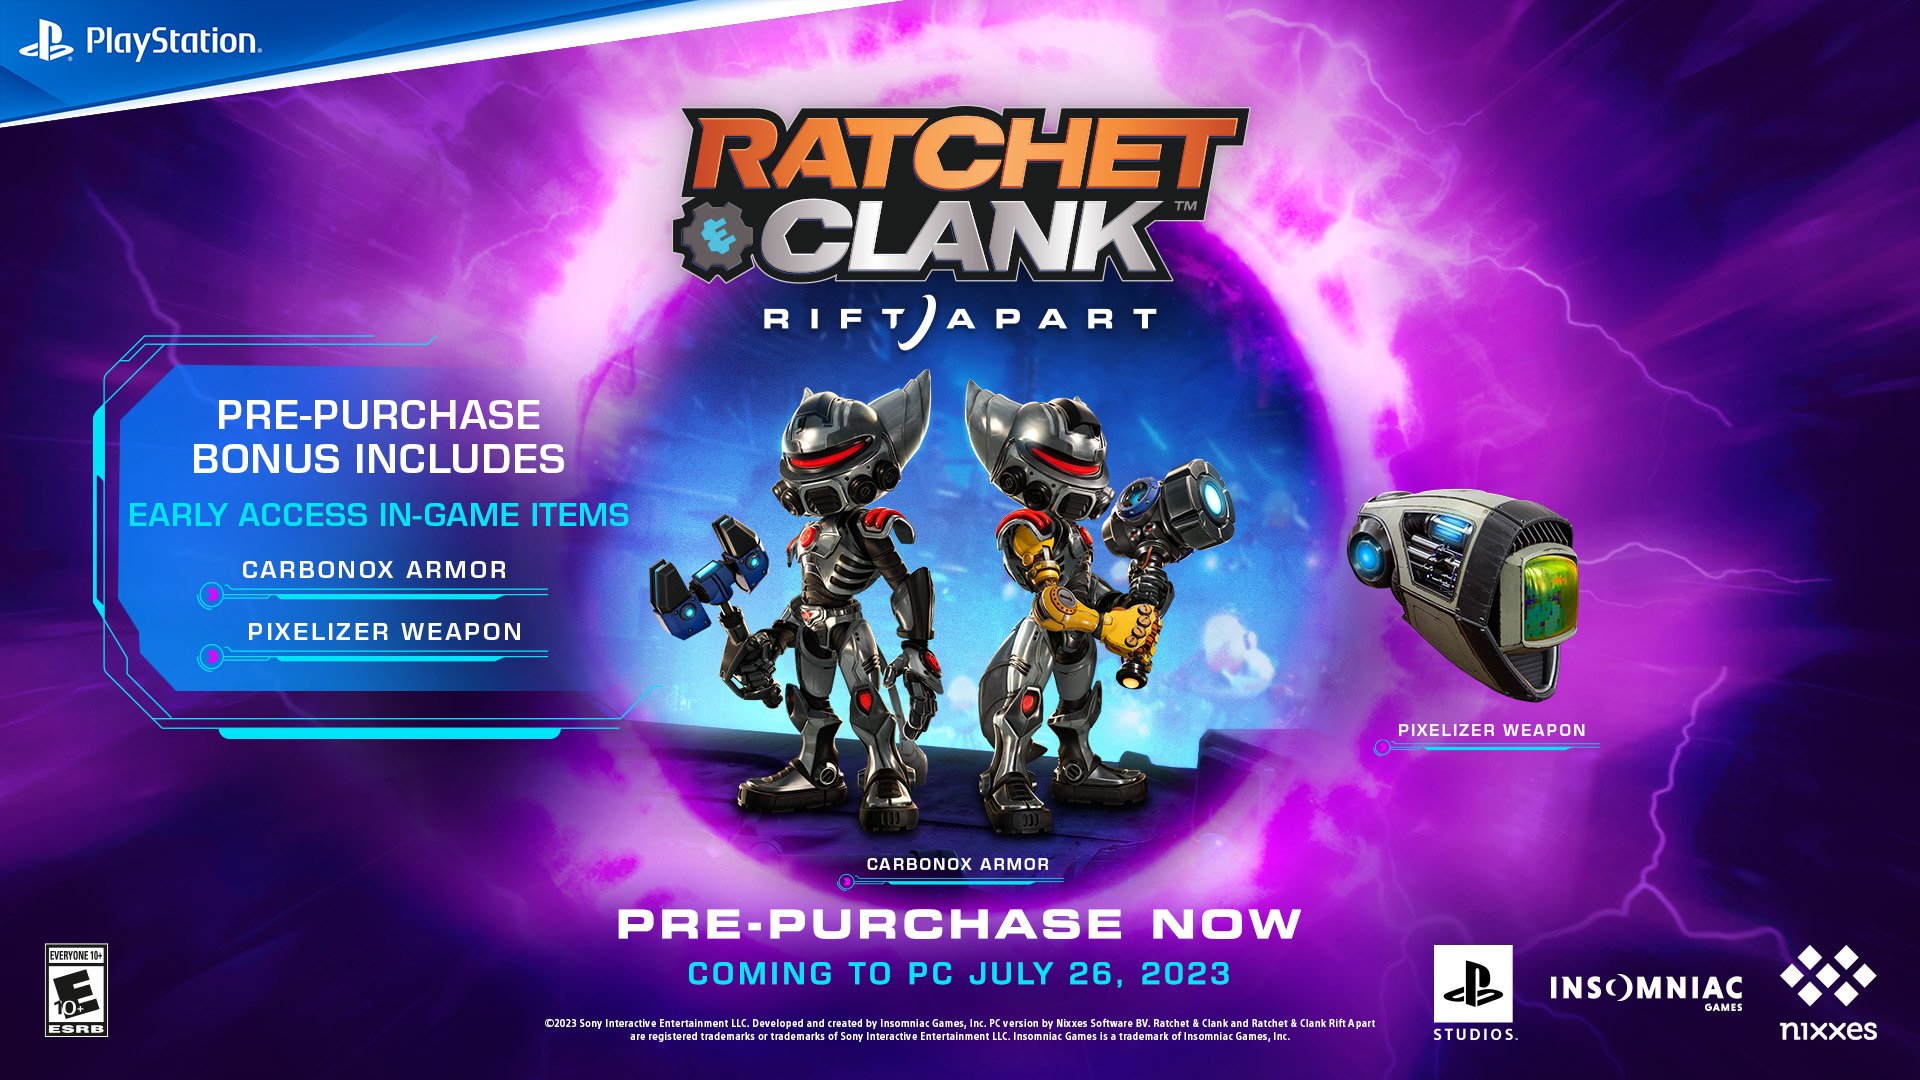 Ratchet and Clank no PC